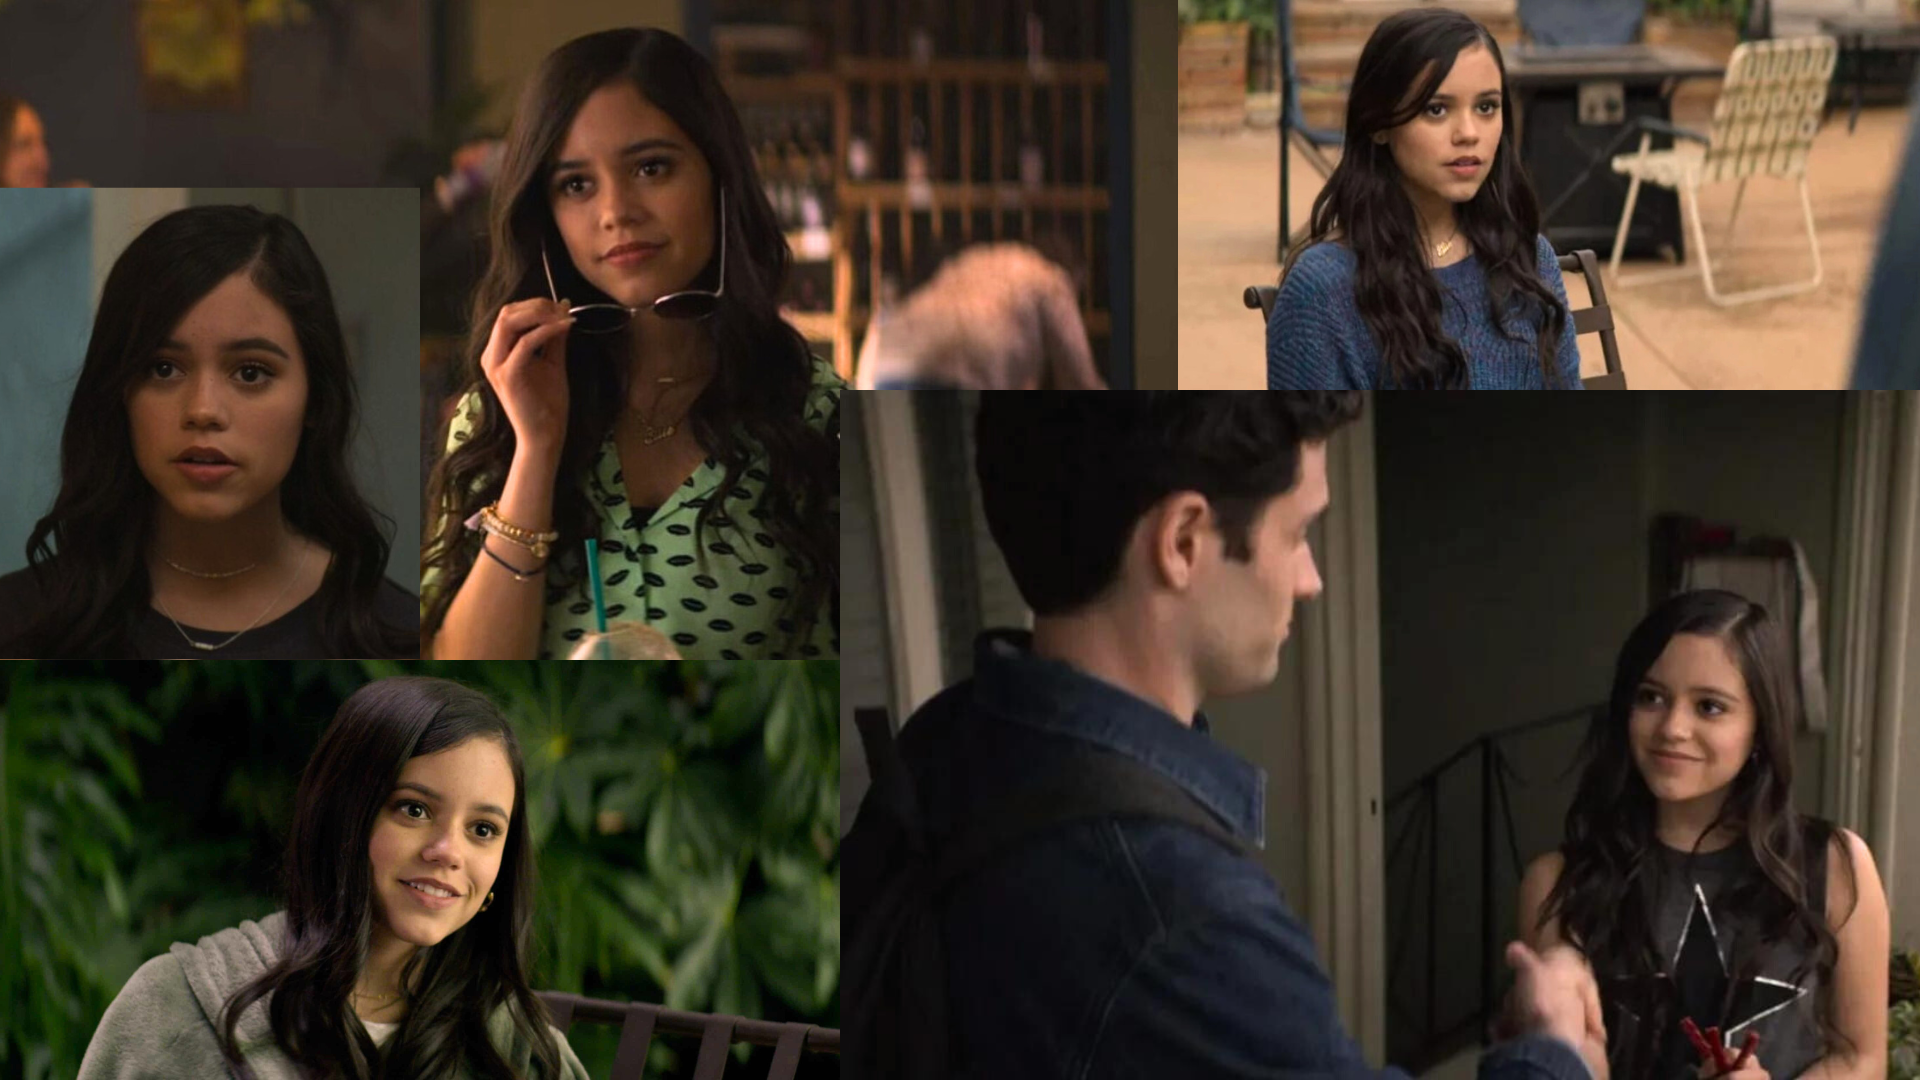 The Phenomenal Talent Of Jenna Ortega in YOU: Why Her Performance Deserves Recognition